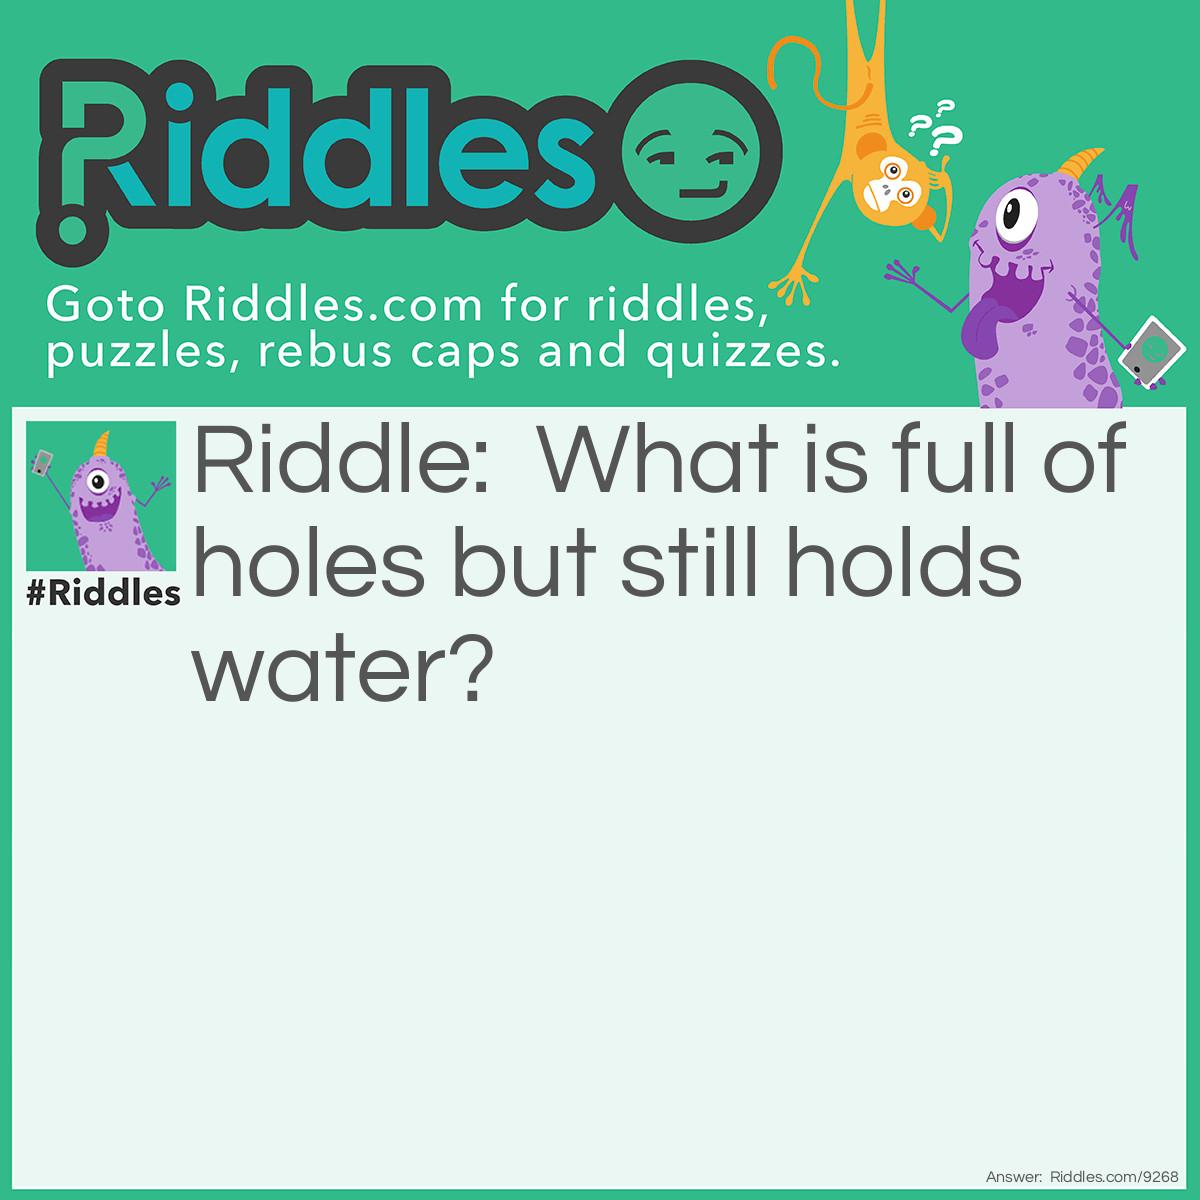 Riddle: What is full of holes but still holds water? Answer: A Sponge.